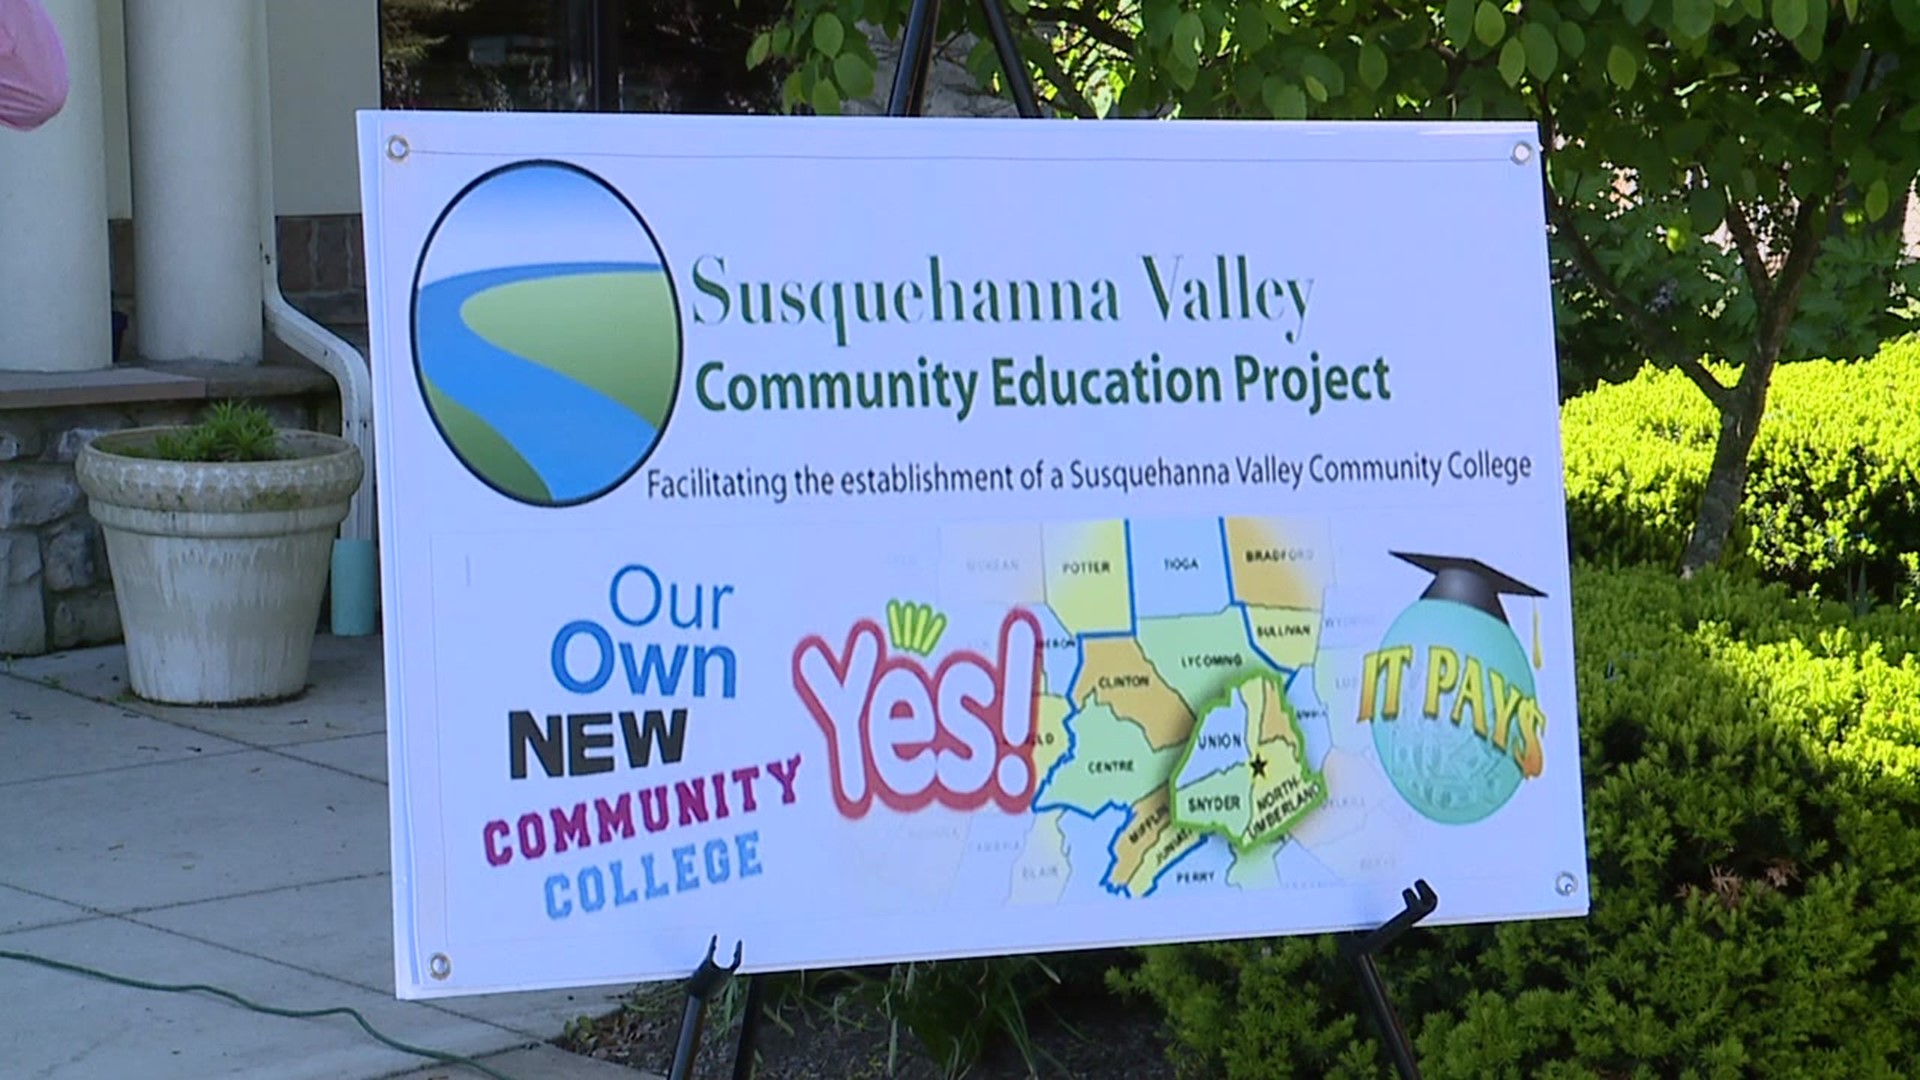 The Susquehanna Valley Community Education Project is partnering with Marywood University to create the 16th community college in the commonwealth.